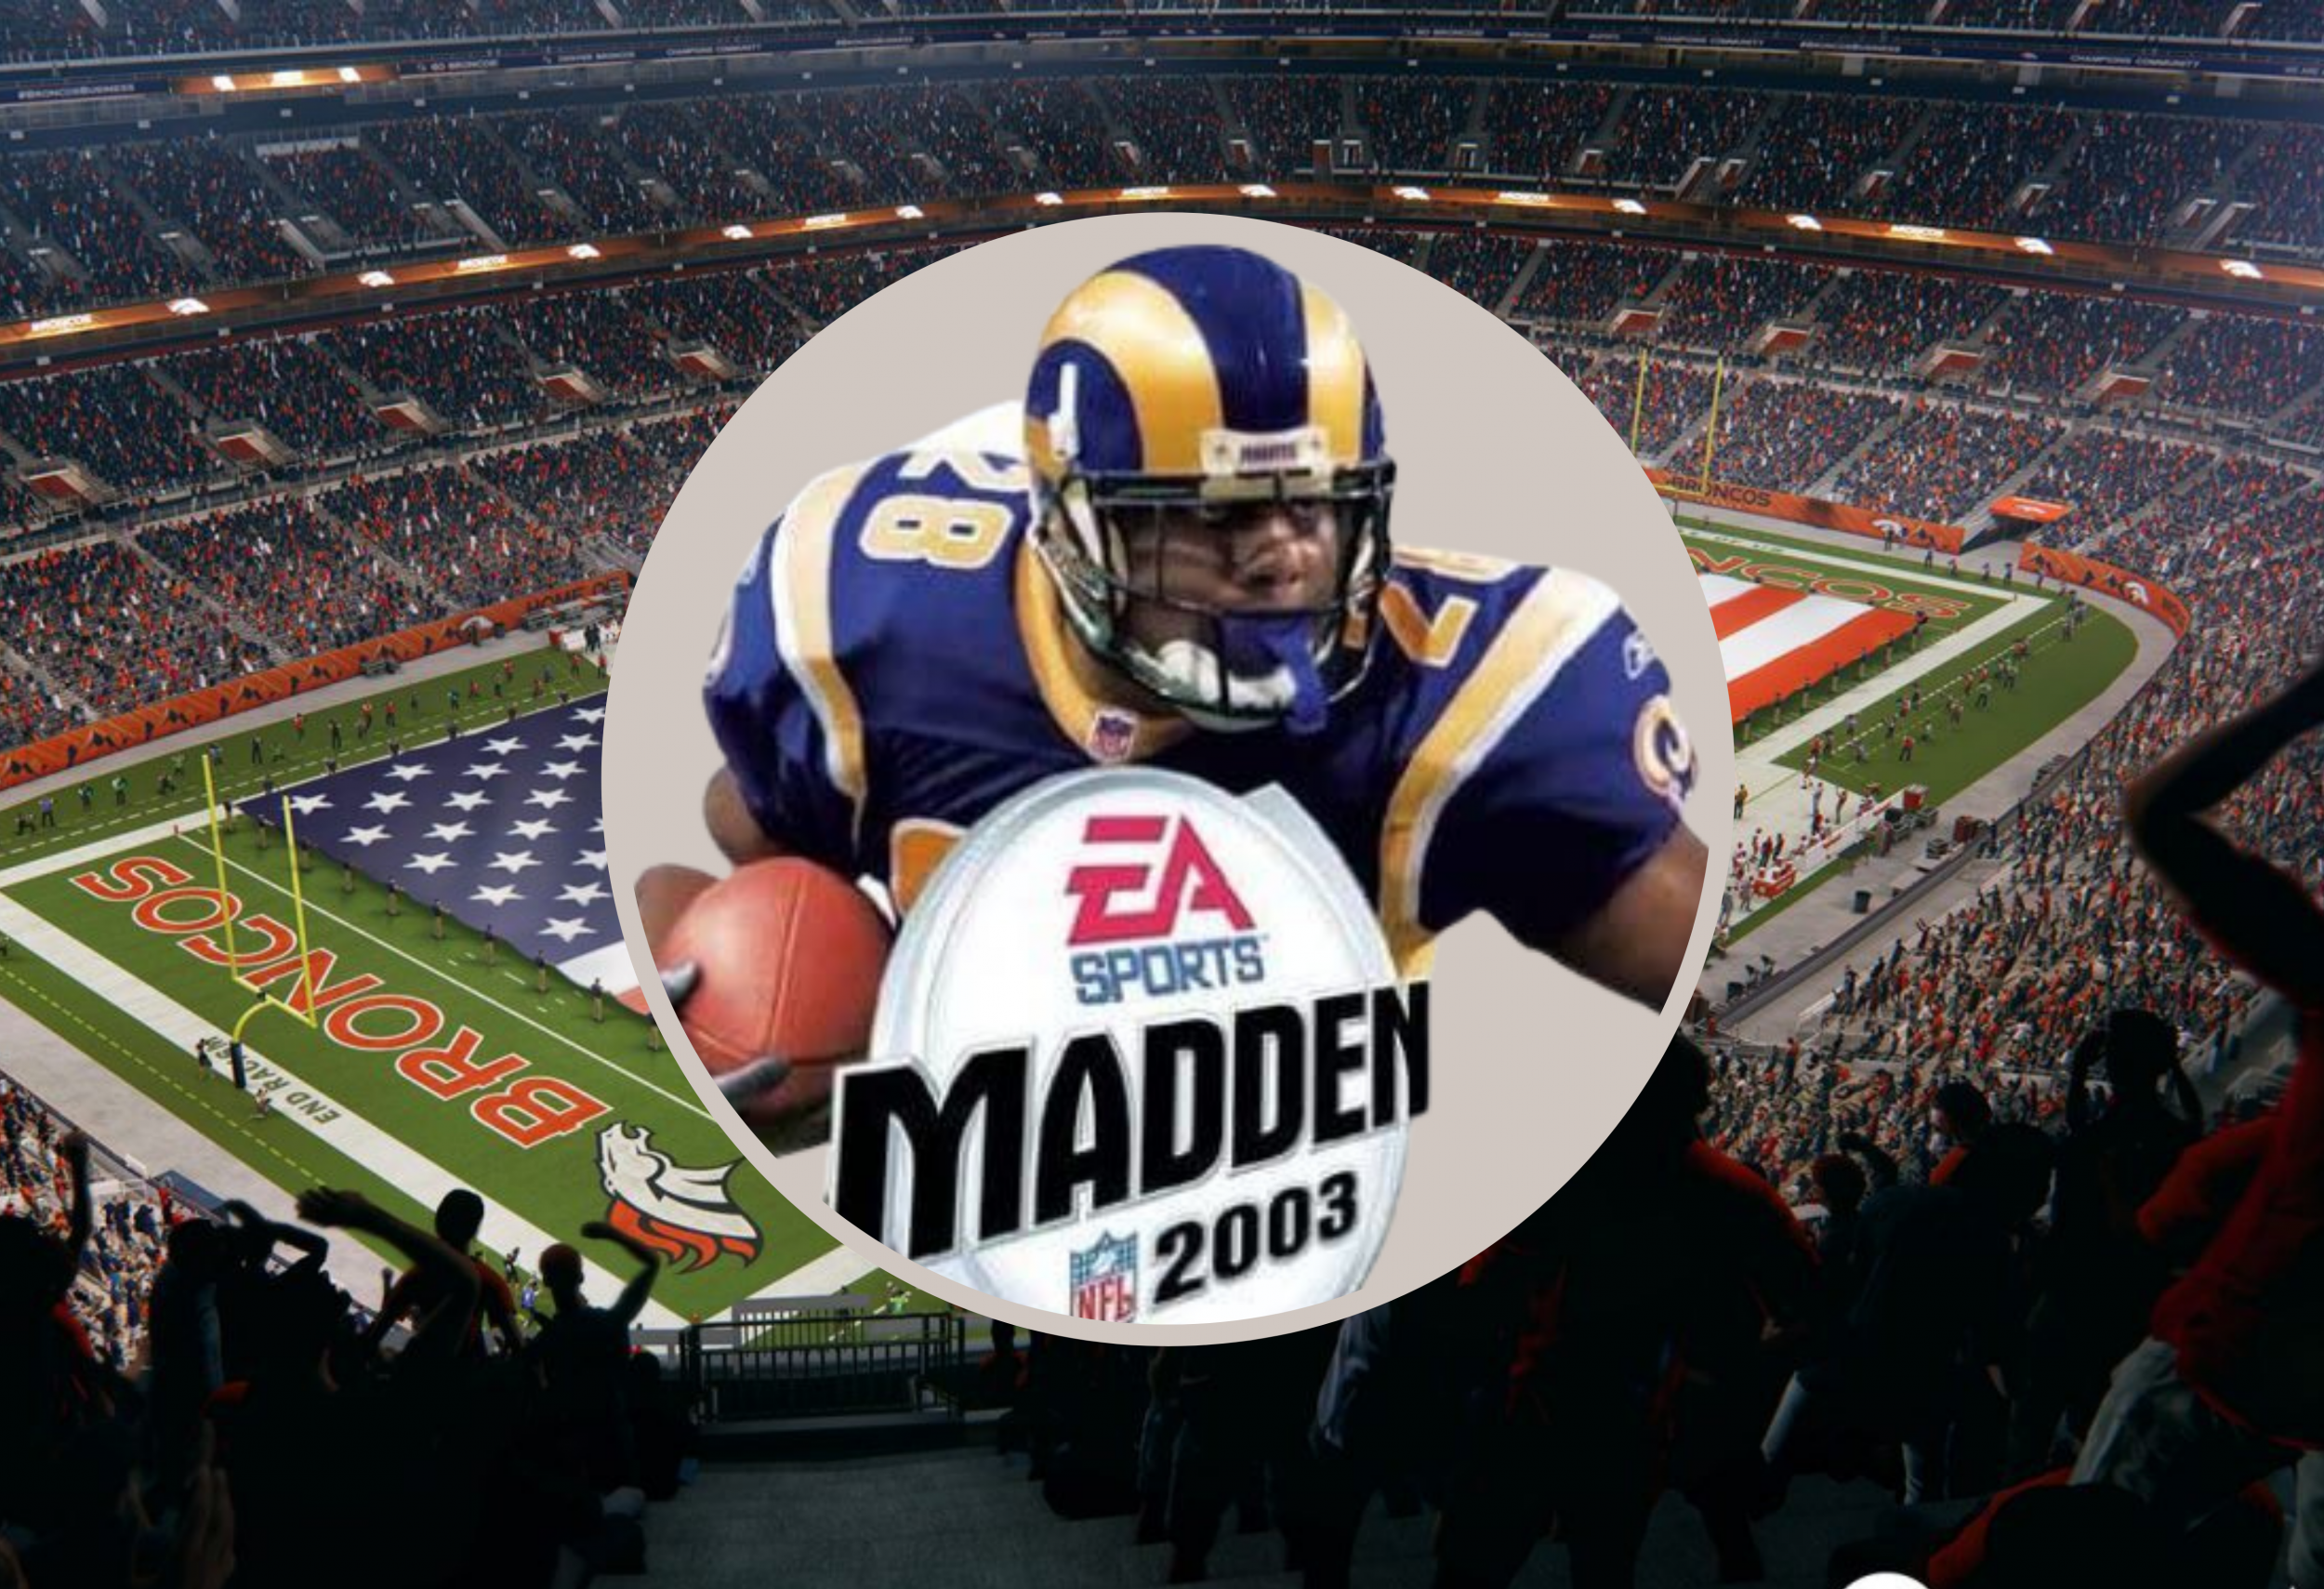 John Madden: The Best 'Madden NFL' Games of All Time, According to Critics